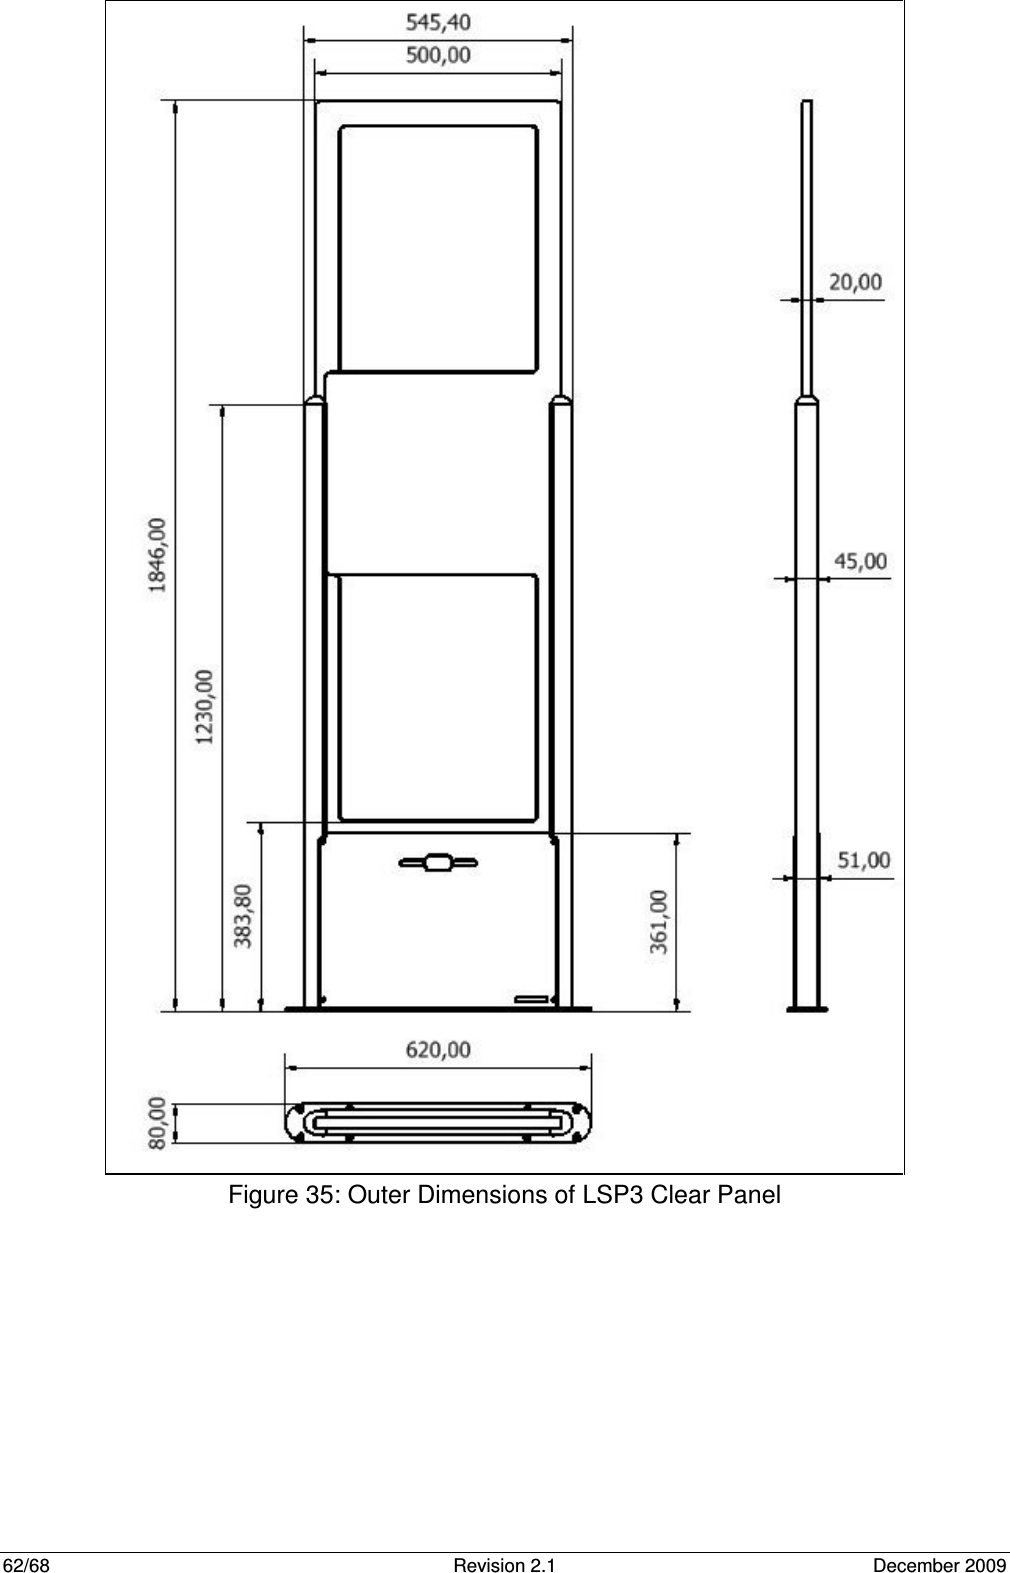  62/68  Revision 2.1  December 2009  Figure 35: Outer Dimensions of LSP3 Clear Panel   